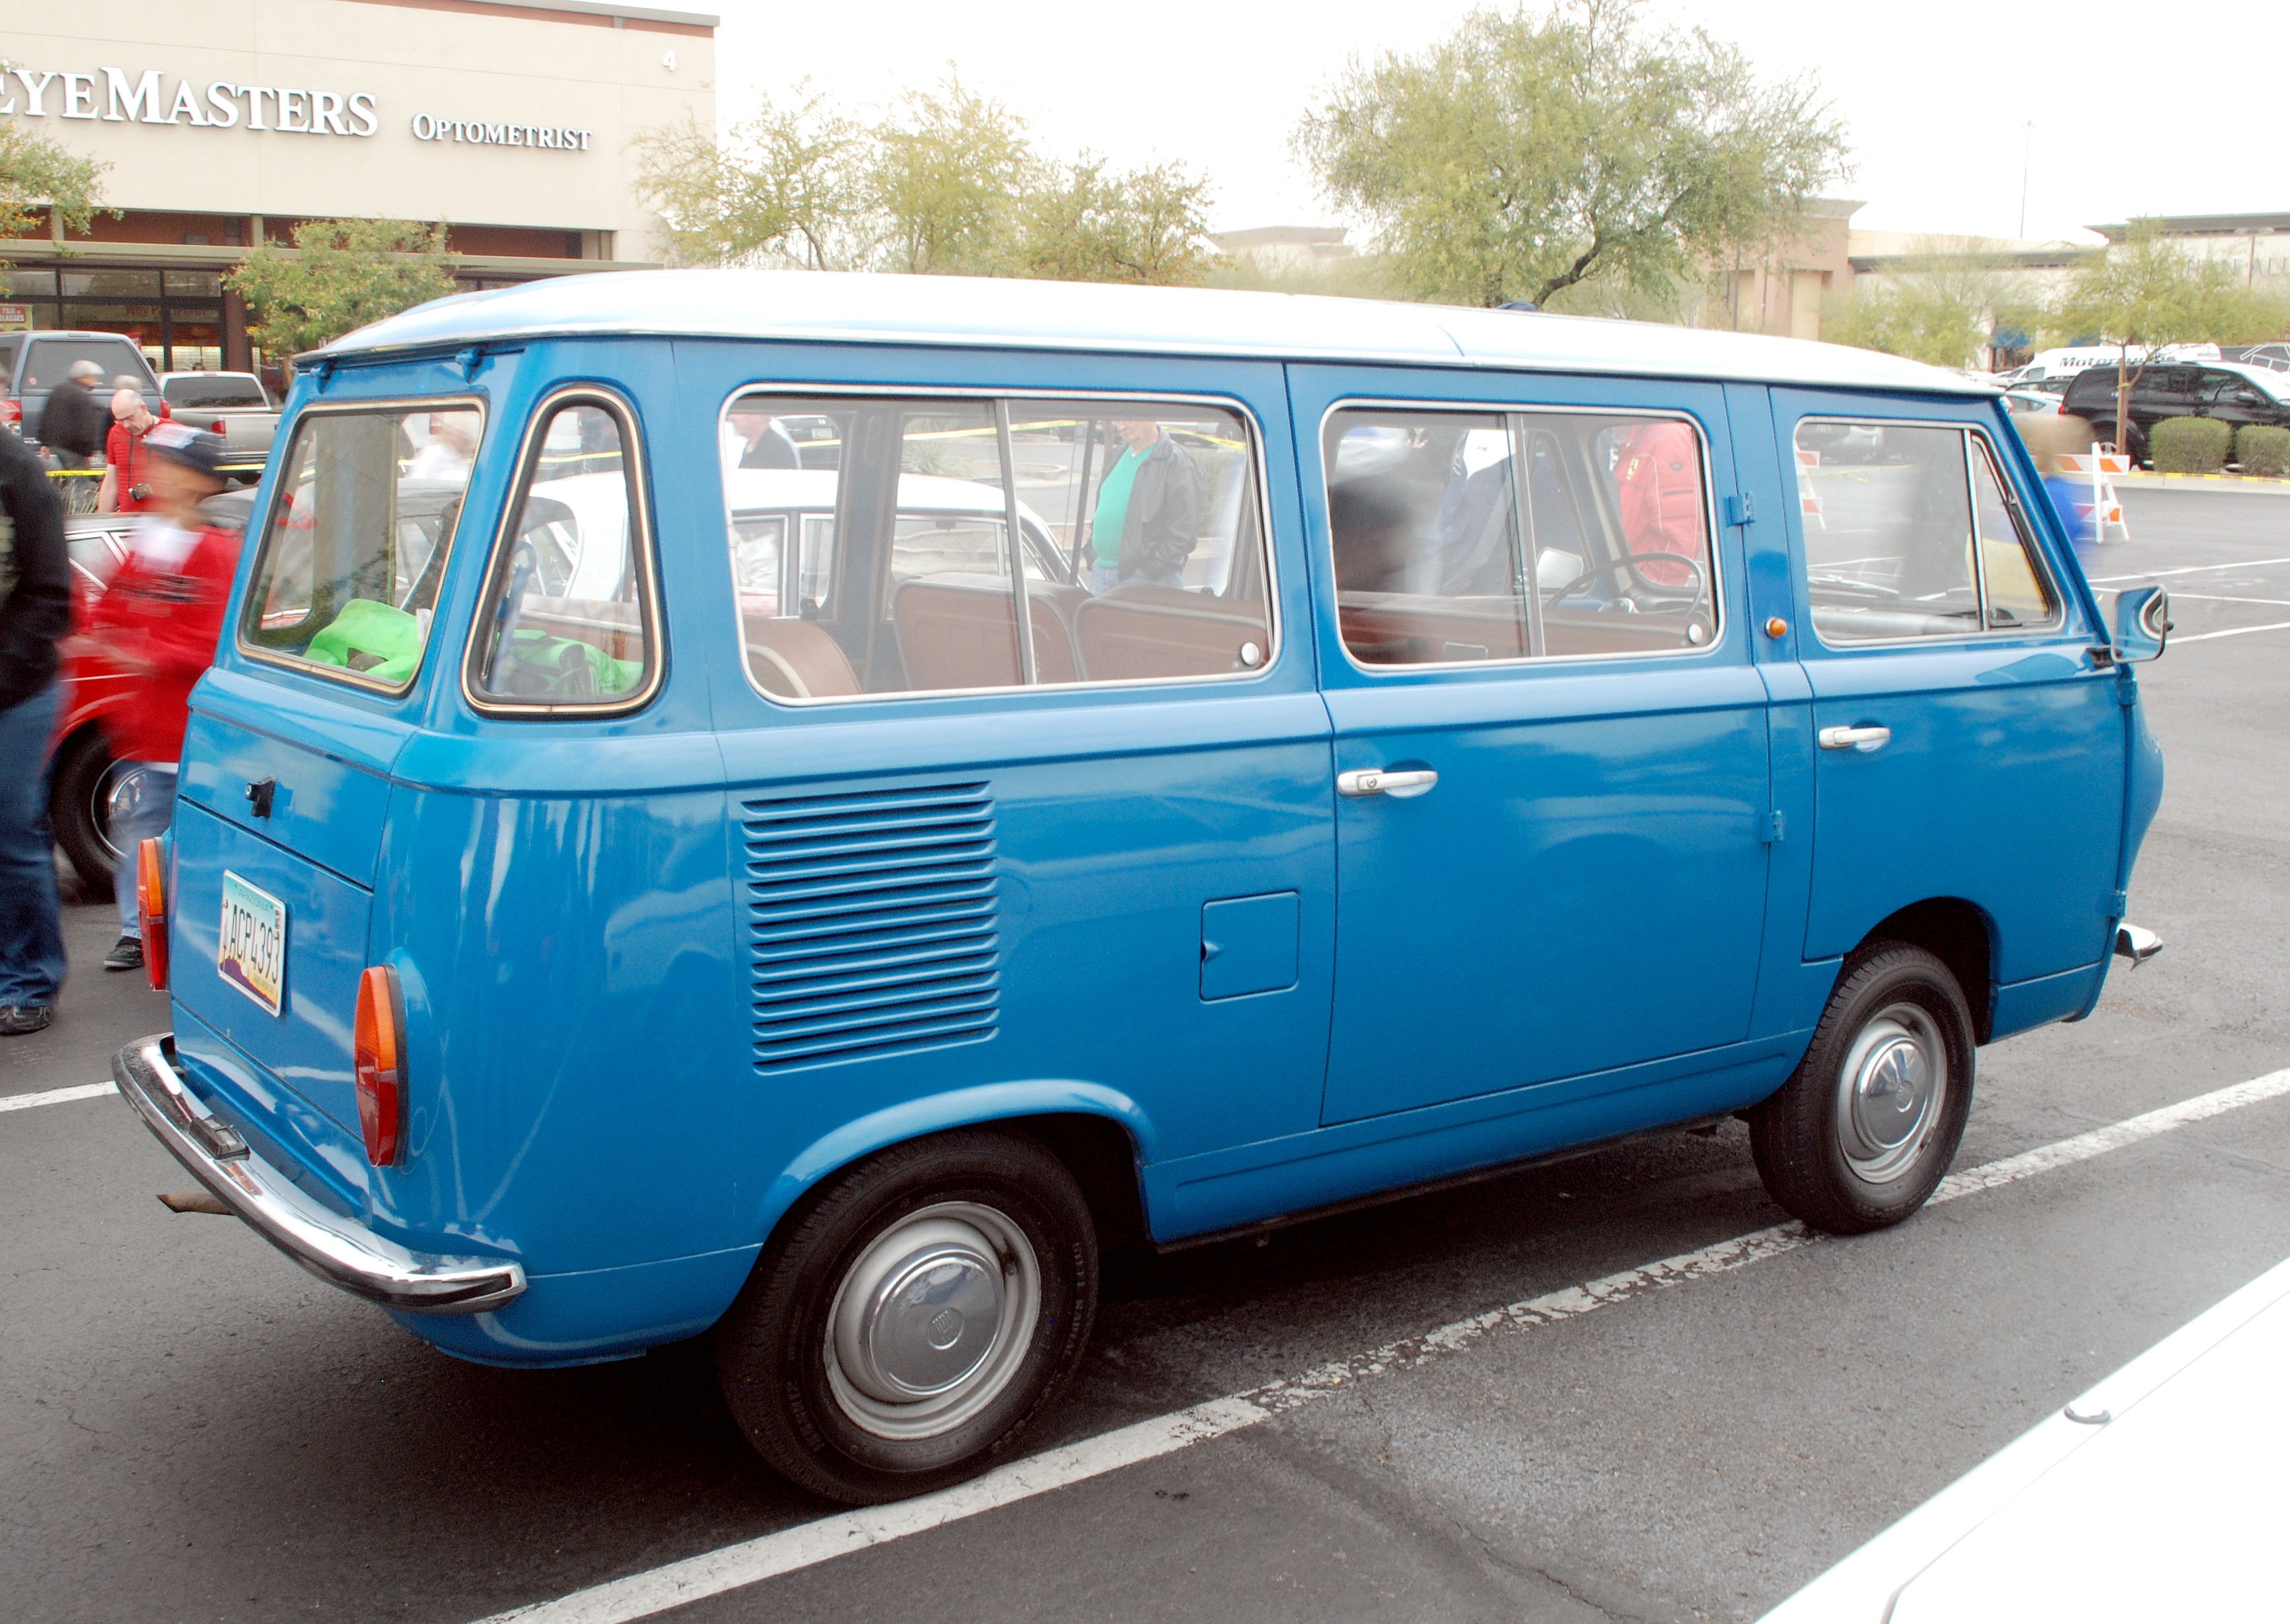 A Fiat Van??huh?? - The Off-Topic Lounge - Model Cars Magazine Forum